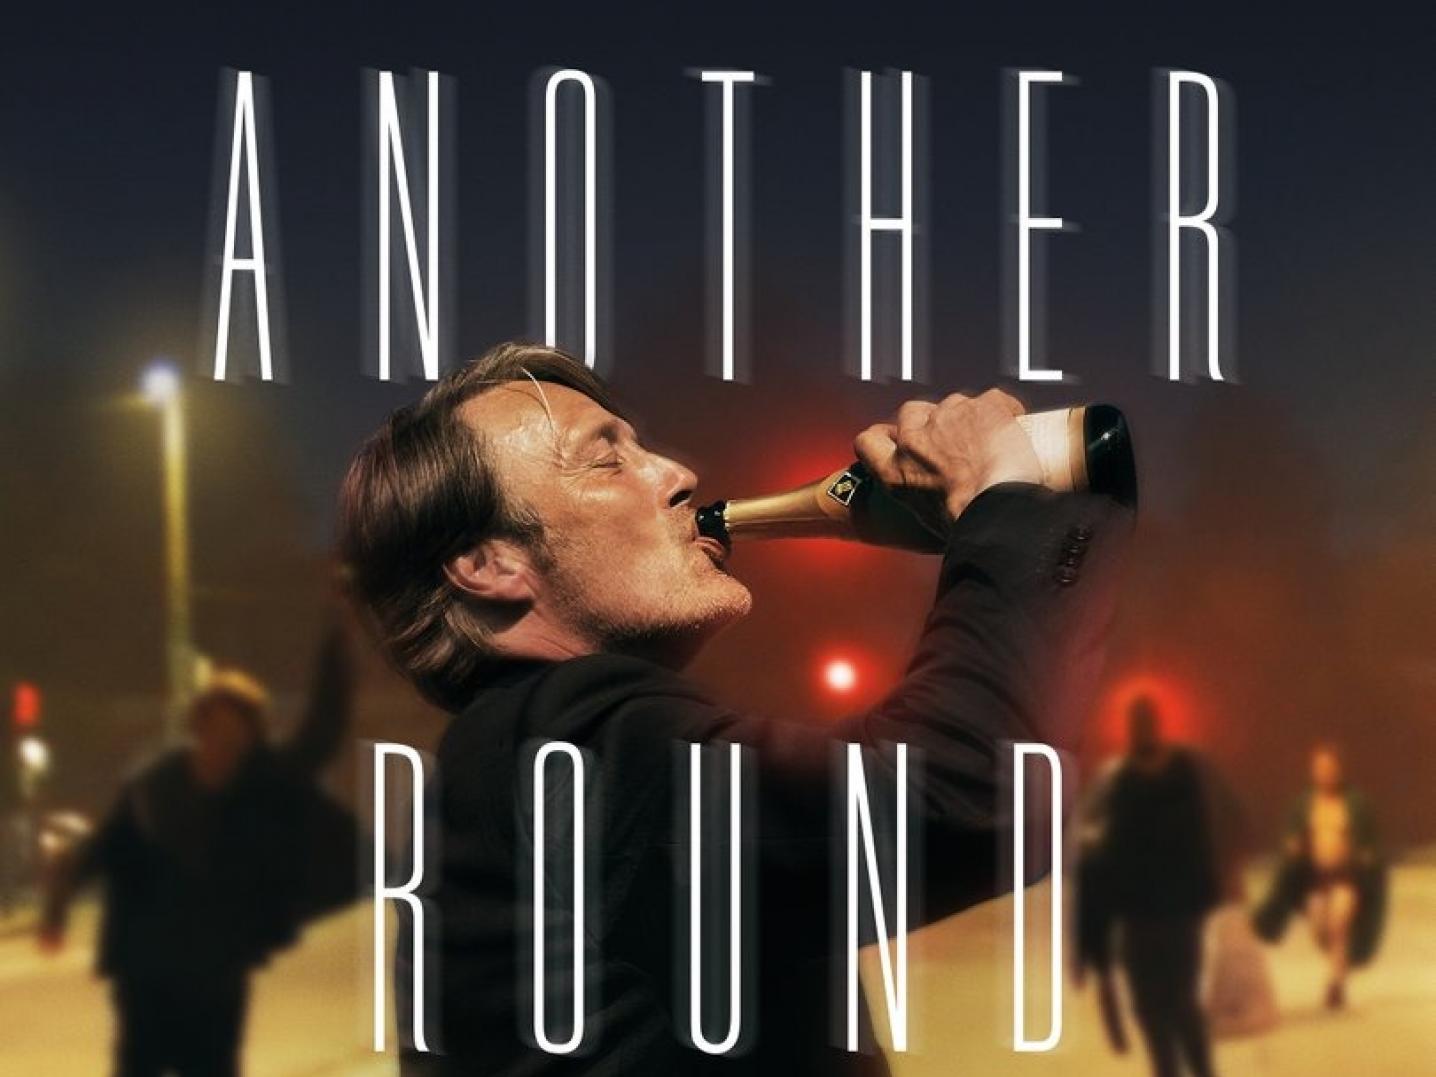 'Another Round' ('Druk'), a film by Thomas Vinterberg, that can be watched via Picl.